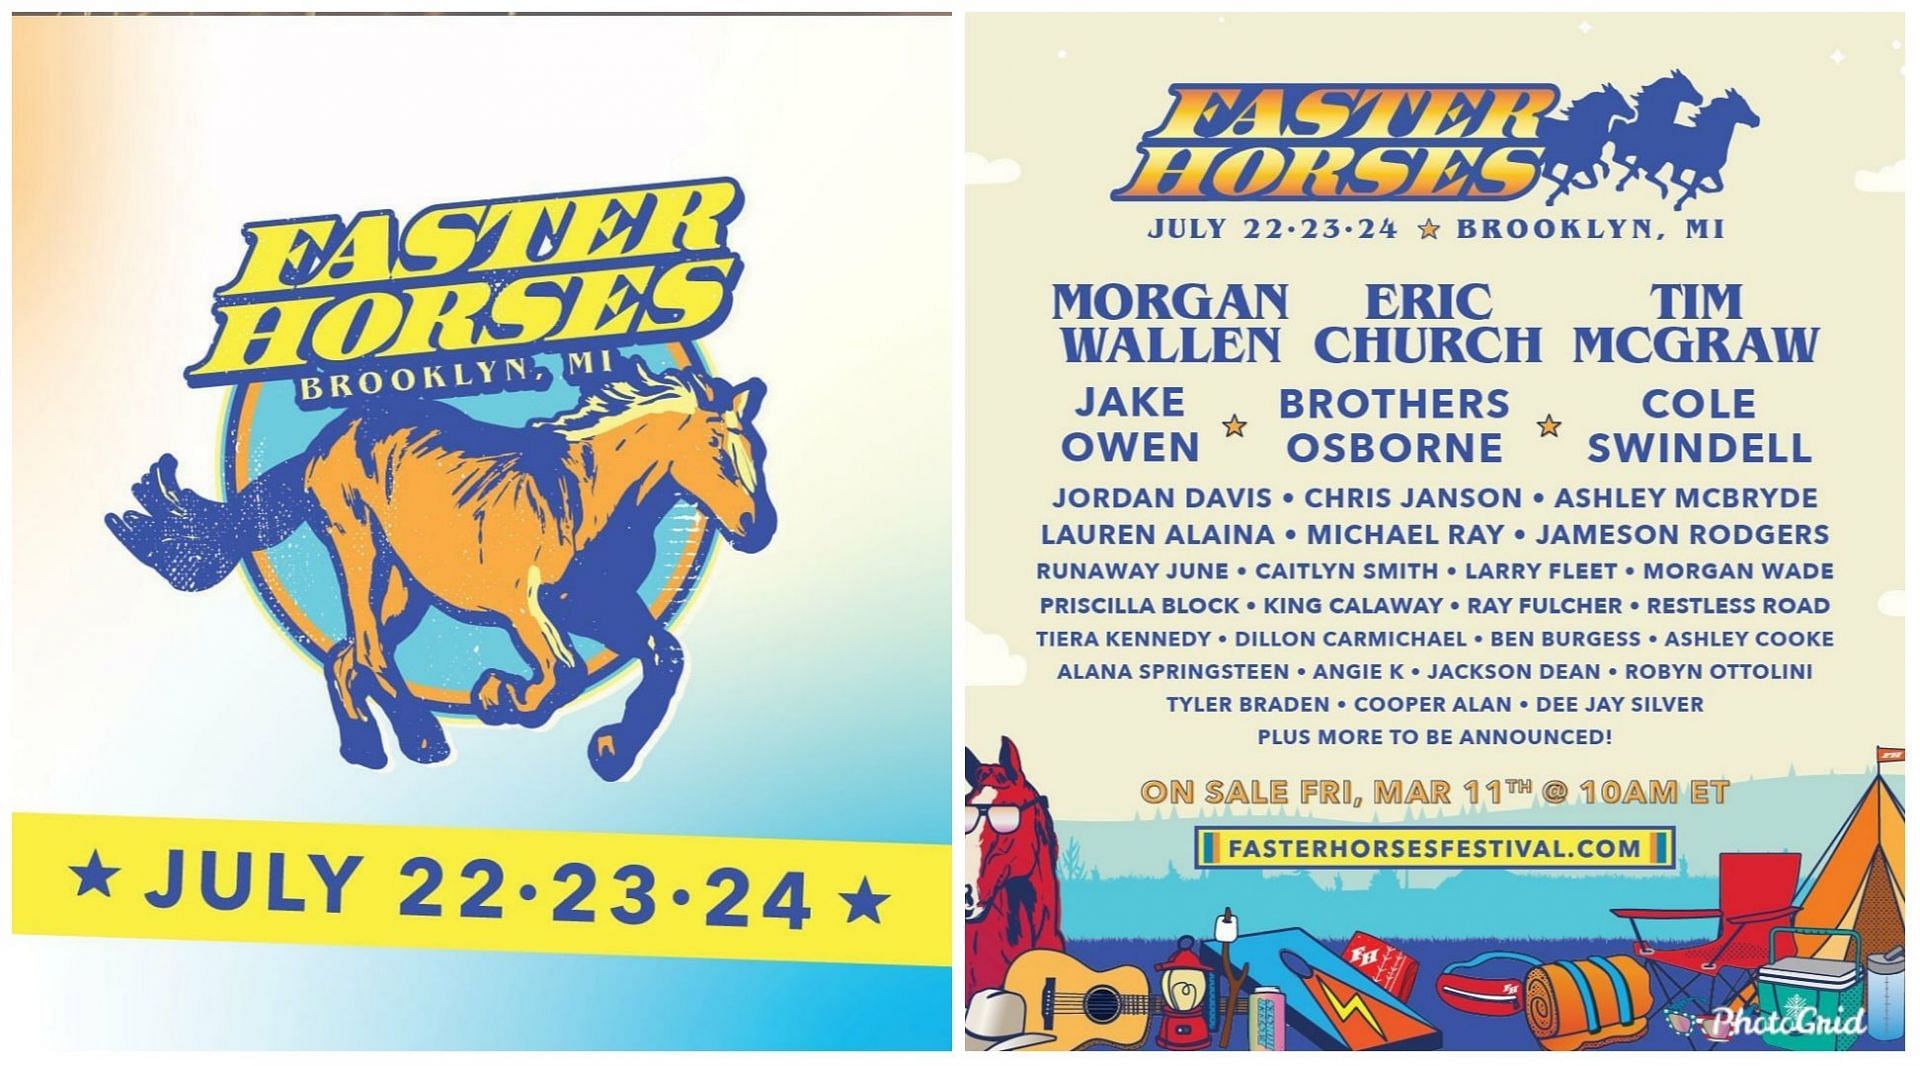 Many country superstars will lead the ninth edition of the Faster Horses festival (Images via Instagram @fasterhorsesfestival)